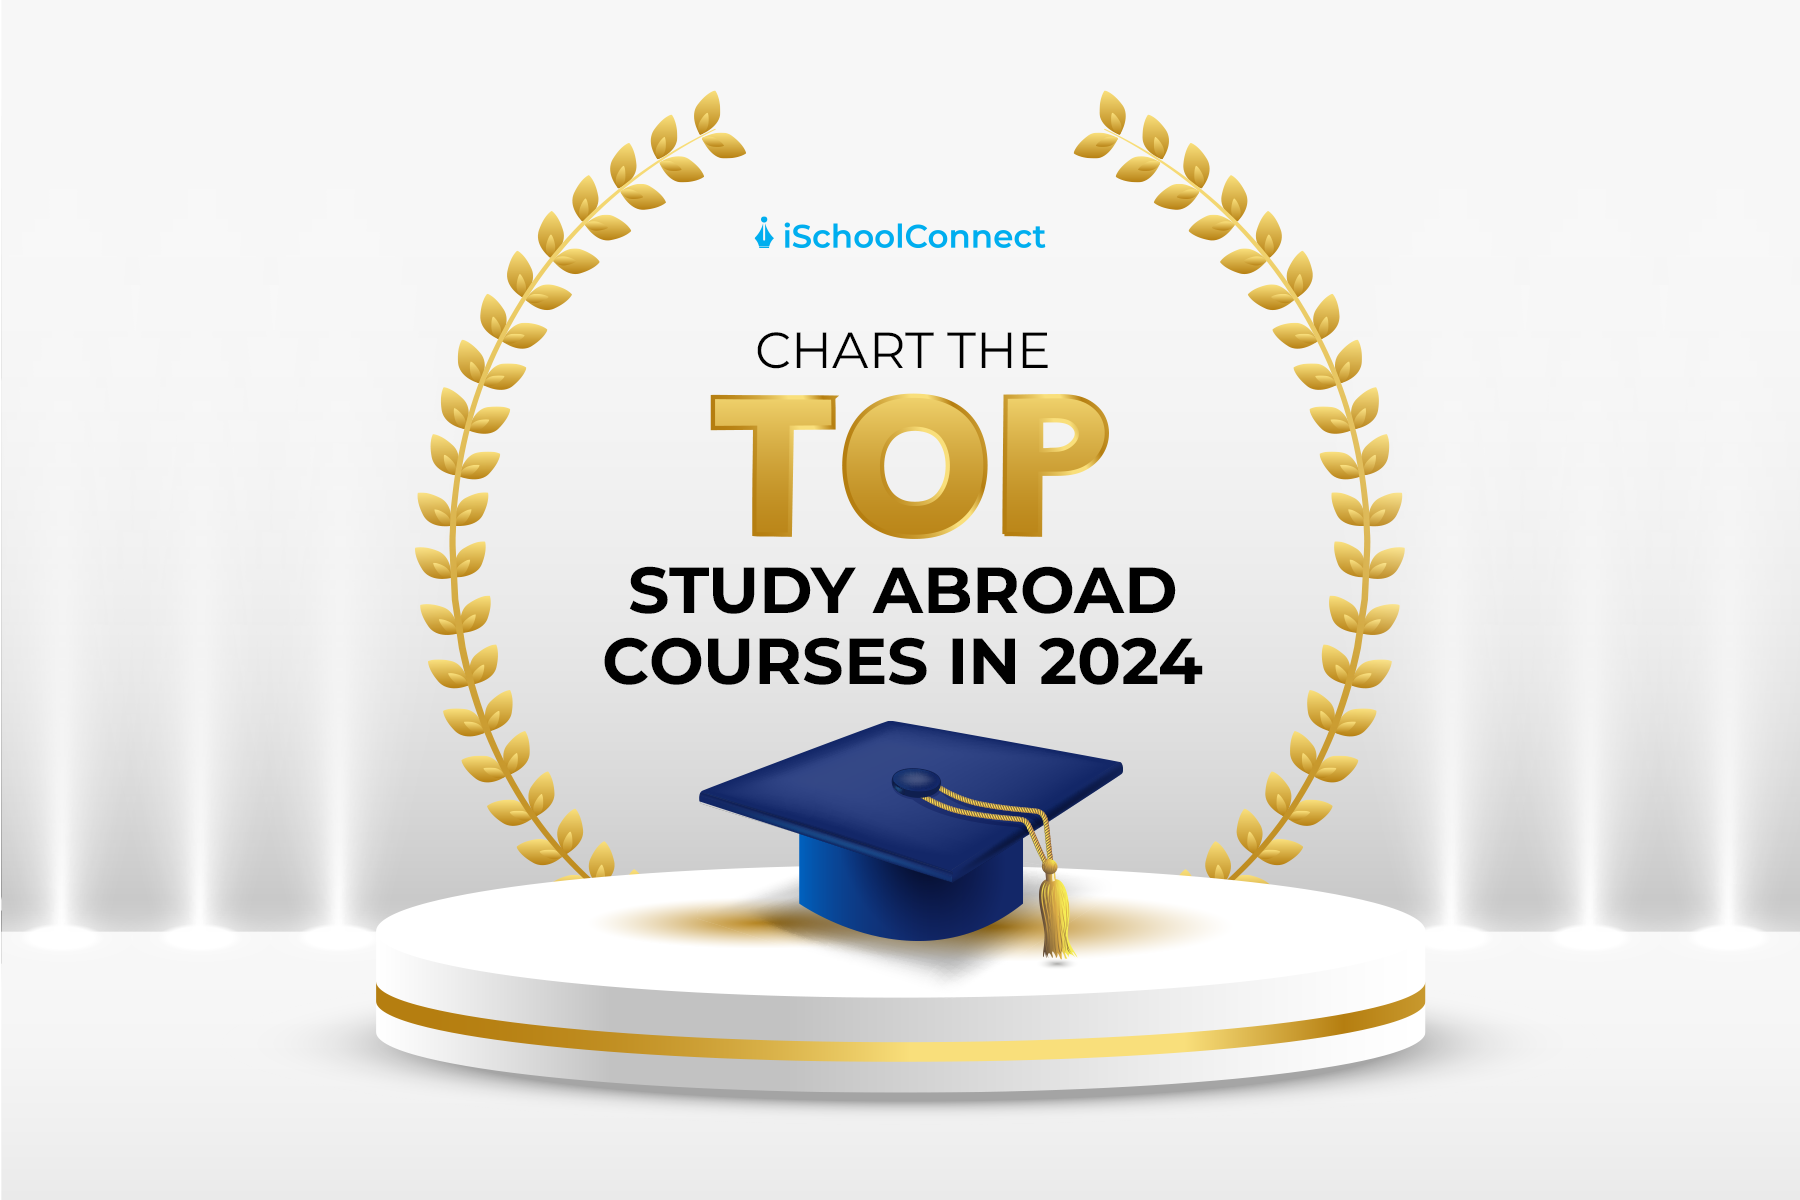 Top courses in 2024 to study abroad